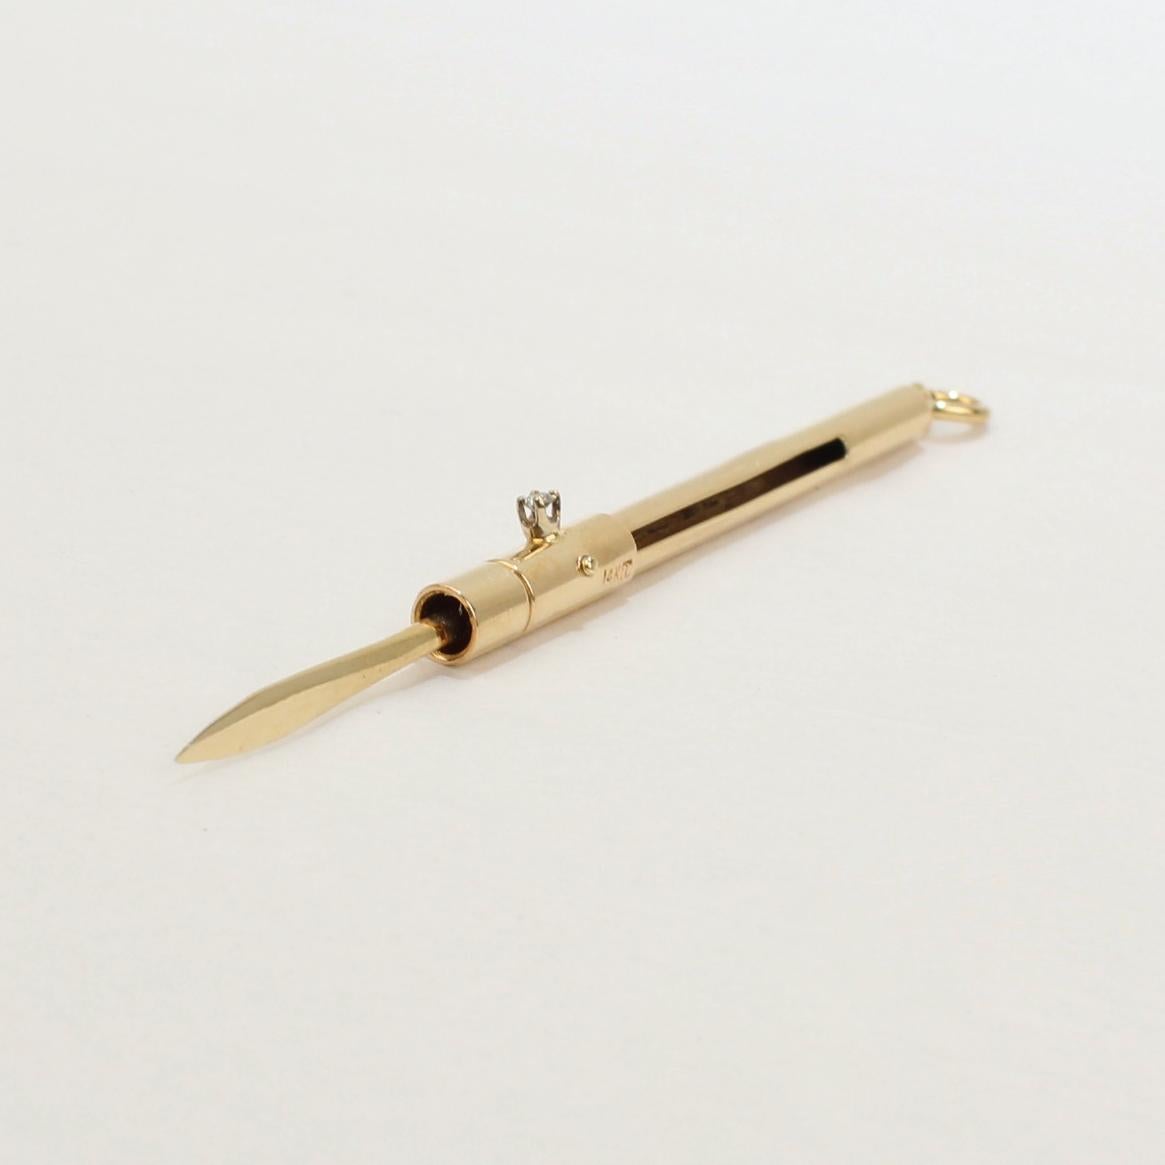 A fine and rare vintage retractable tooth pick.

In 14k gold and set with a prong set diamond functioning as its tab handle.

The toothpick is set with a bail and jump ring and is meant to be suspended from a chain.

A fun and whimsical